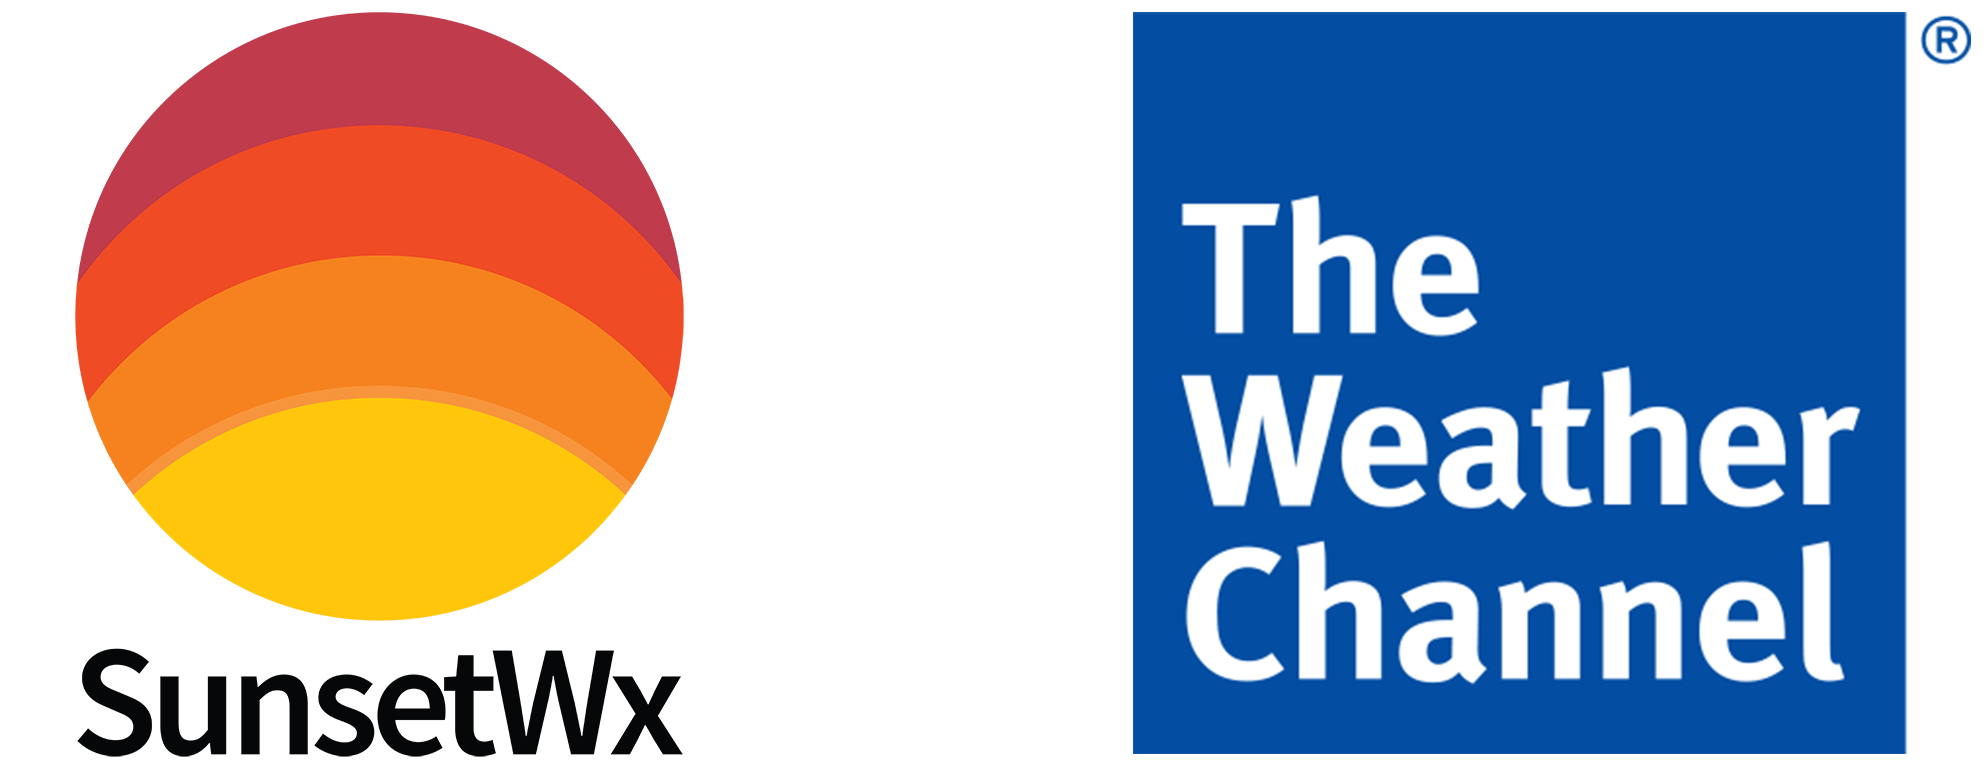 The Weather Channel Logo - SunsetWx Announces Partnership with The Weather Channel – SunsetWx, LLC